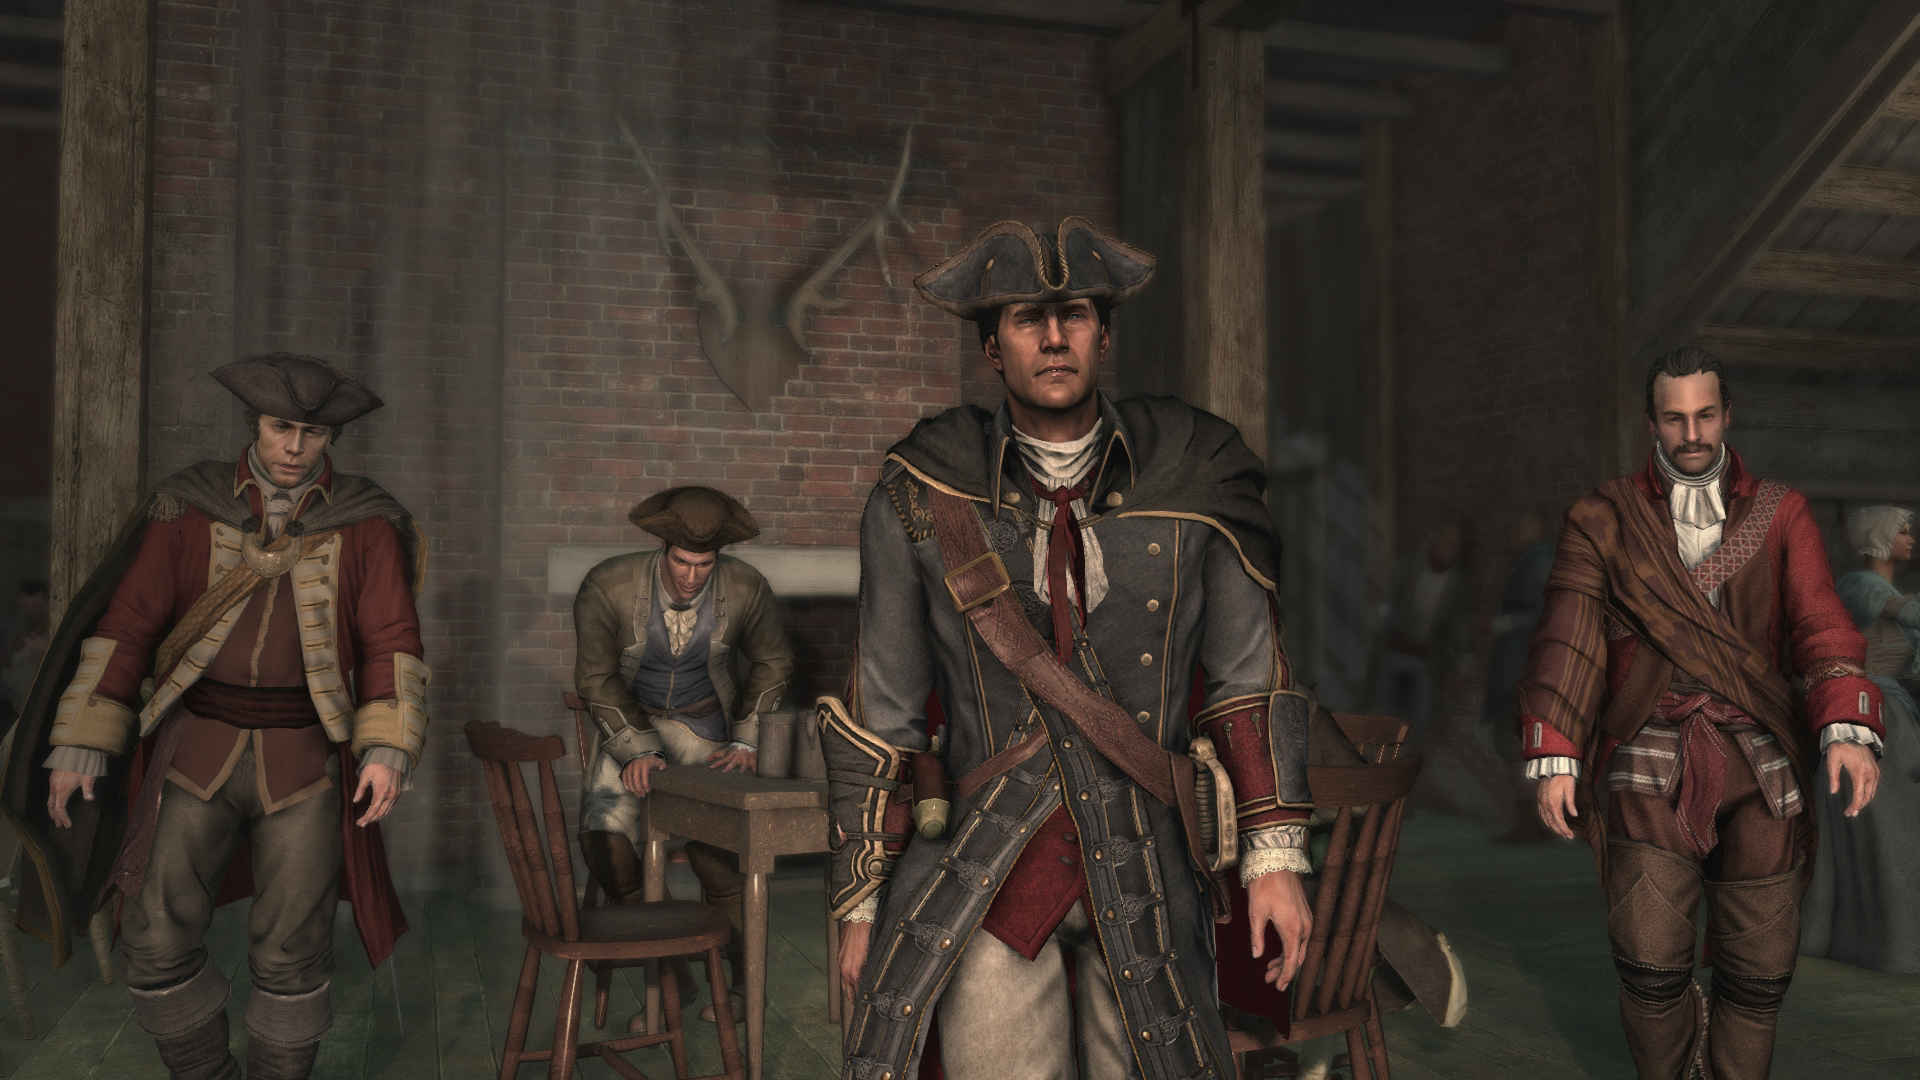 http://images2.wikia.nocookie.net/__cb20121130180324/assassinscreed/images/1/13/ACIII-BraddockExpedition_3.png